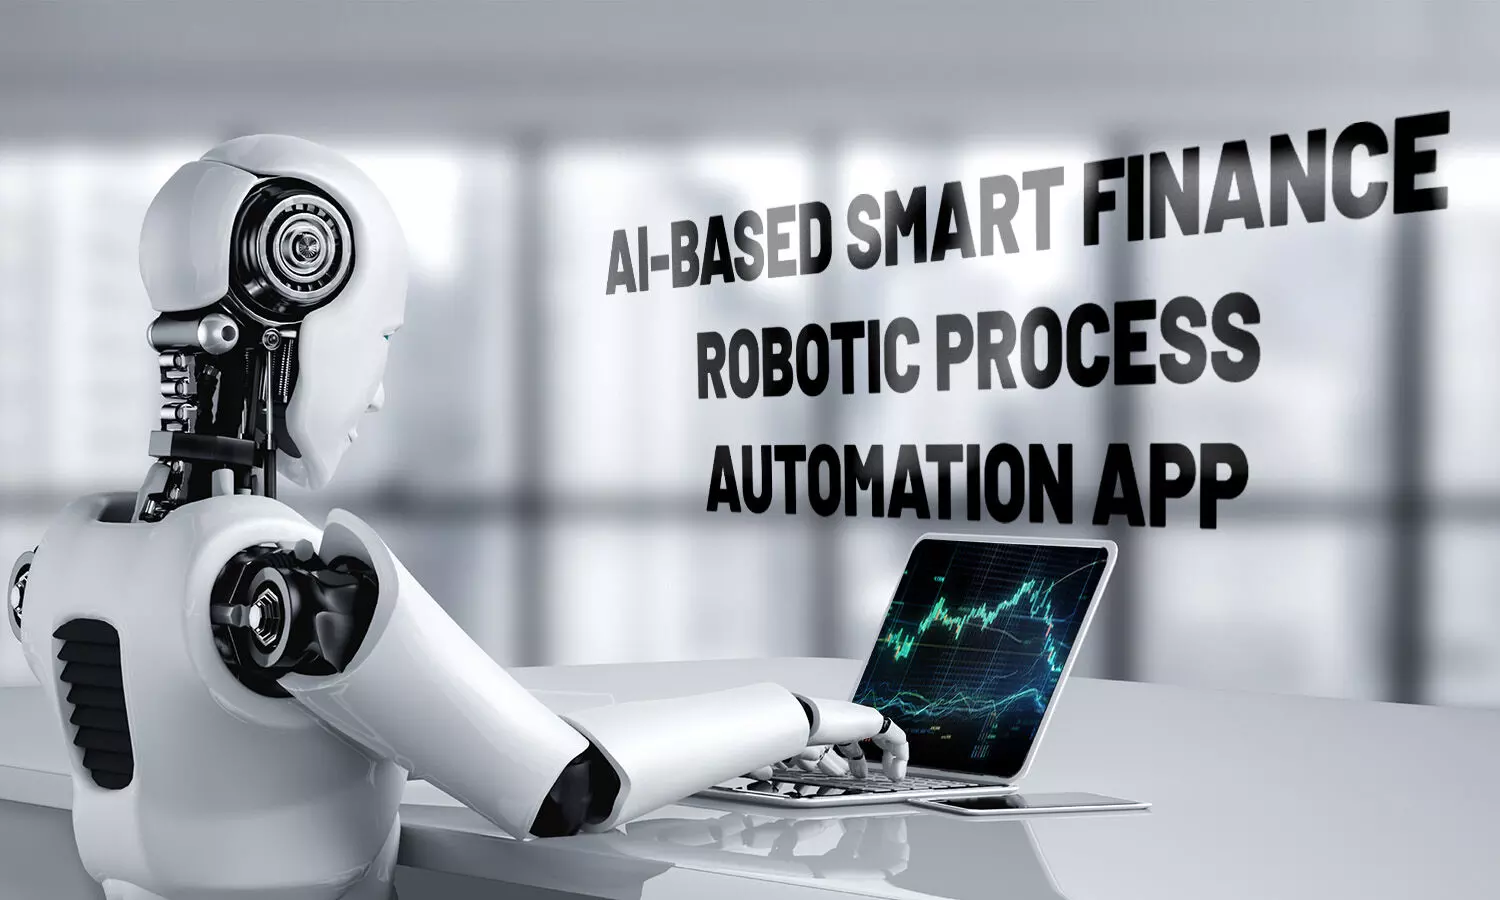 AI-based Smart Finance Robotic Process Automation Apps on The Rise